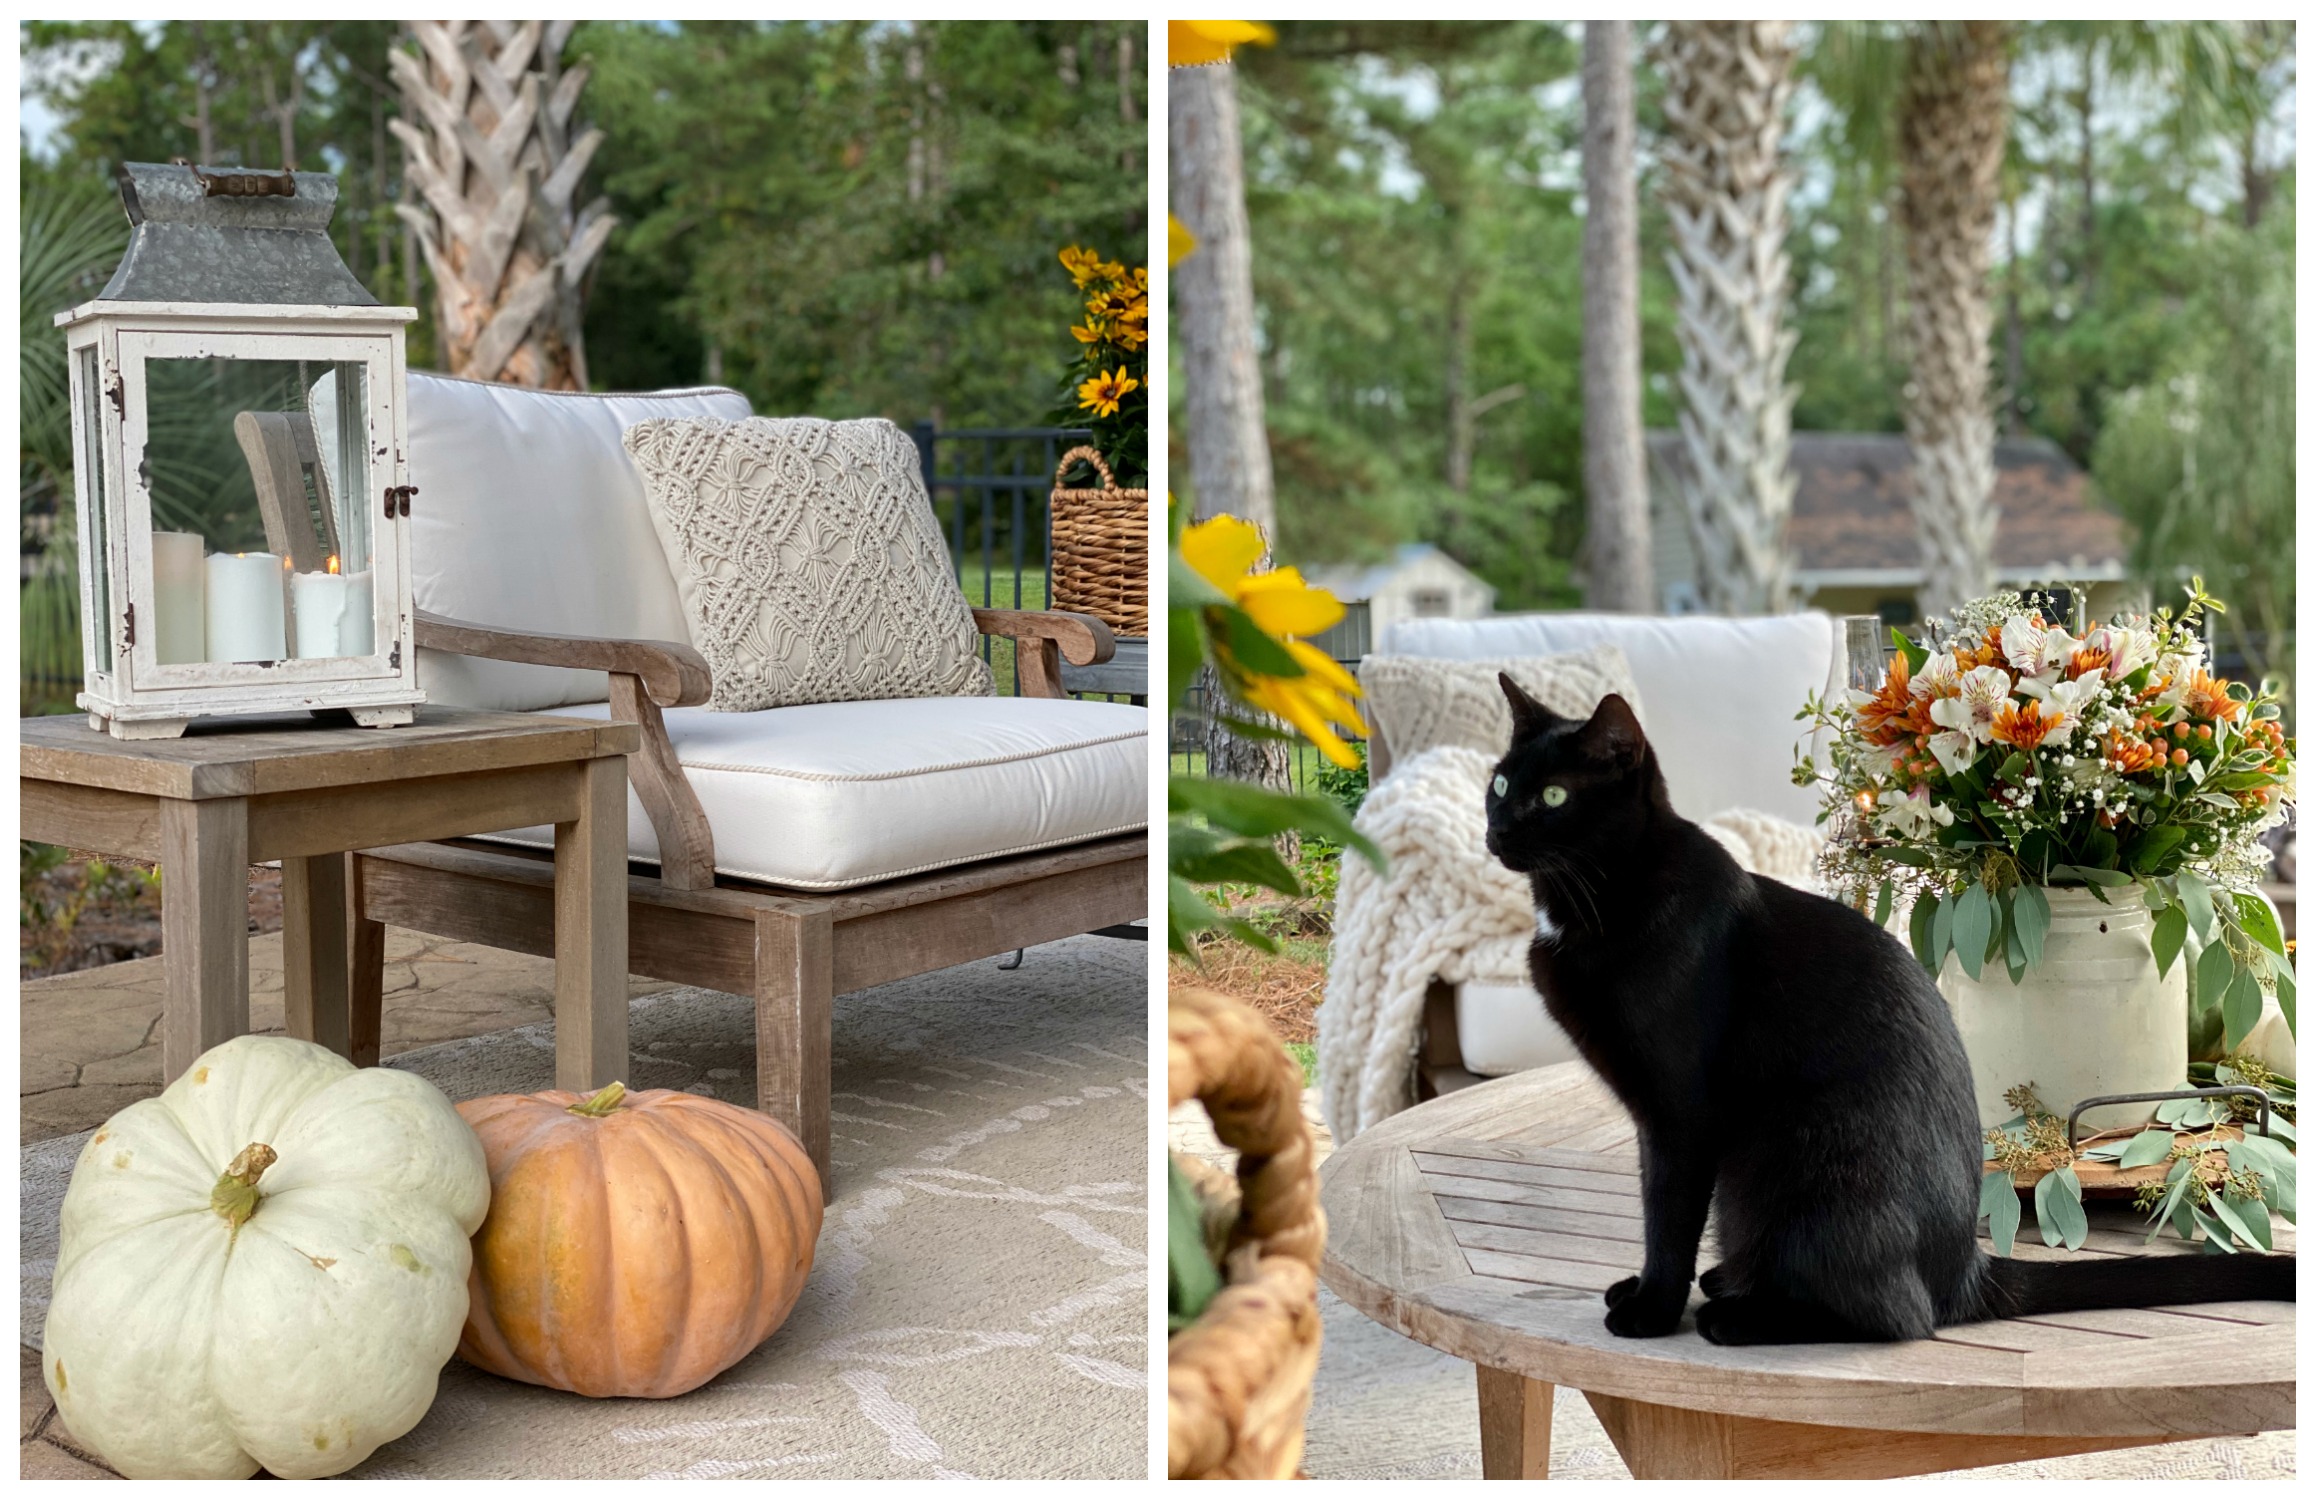 A collage of two photos. One with a cozy chair and pumpkins on the floor. The other photo has a black cat sitting on the table next to a Fall floral arrangement.